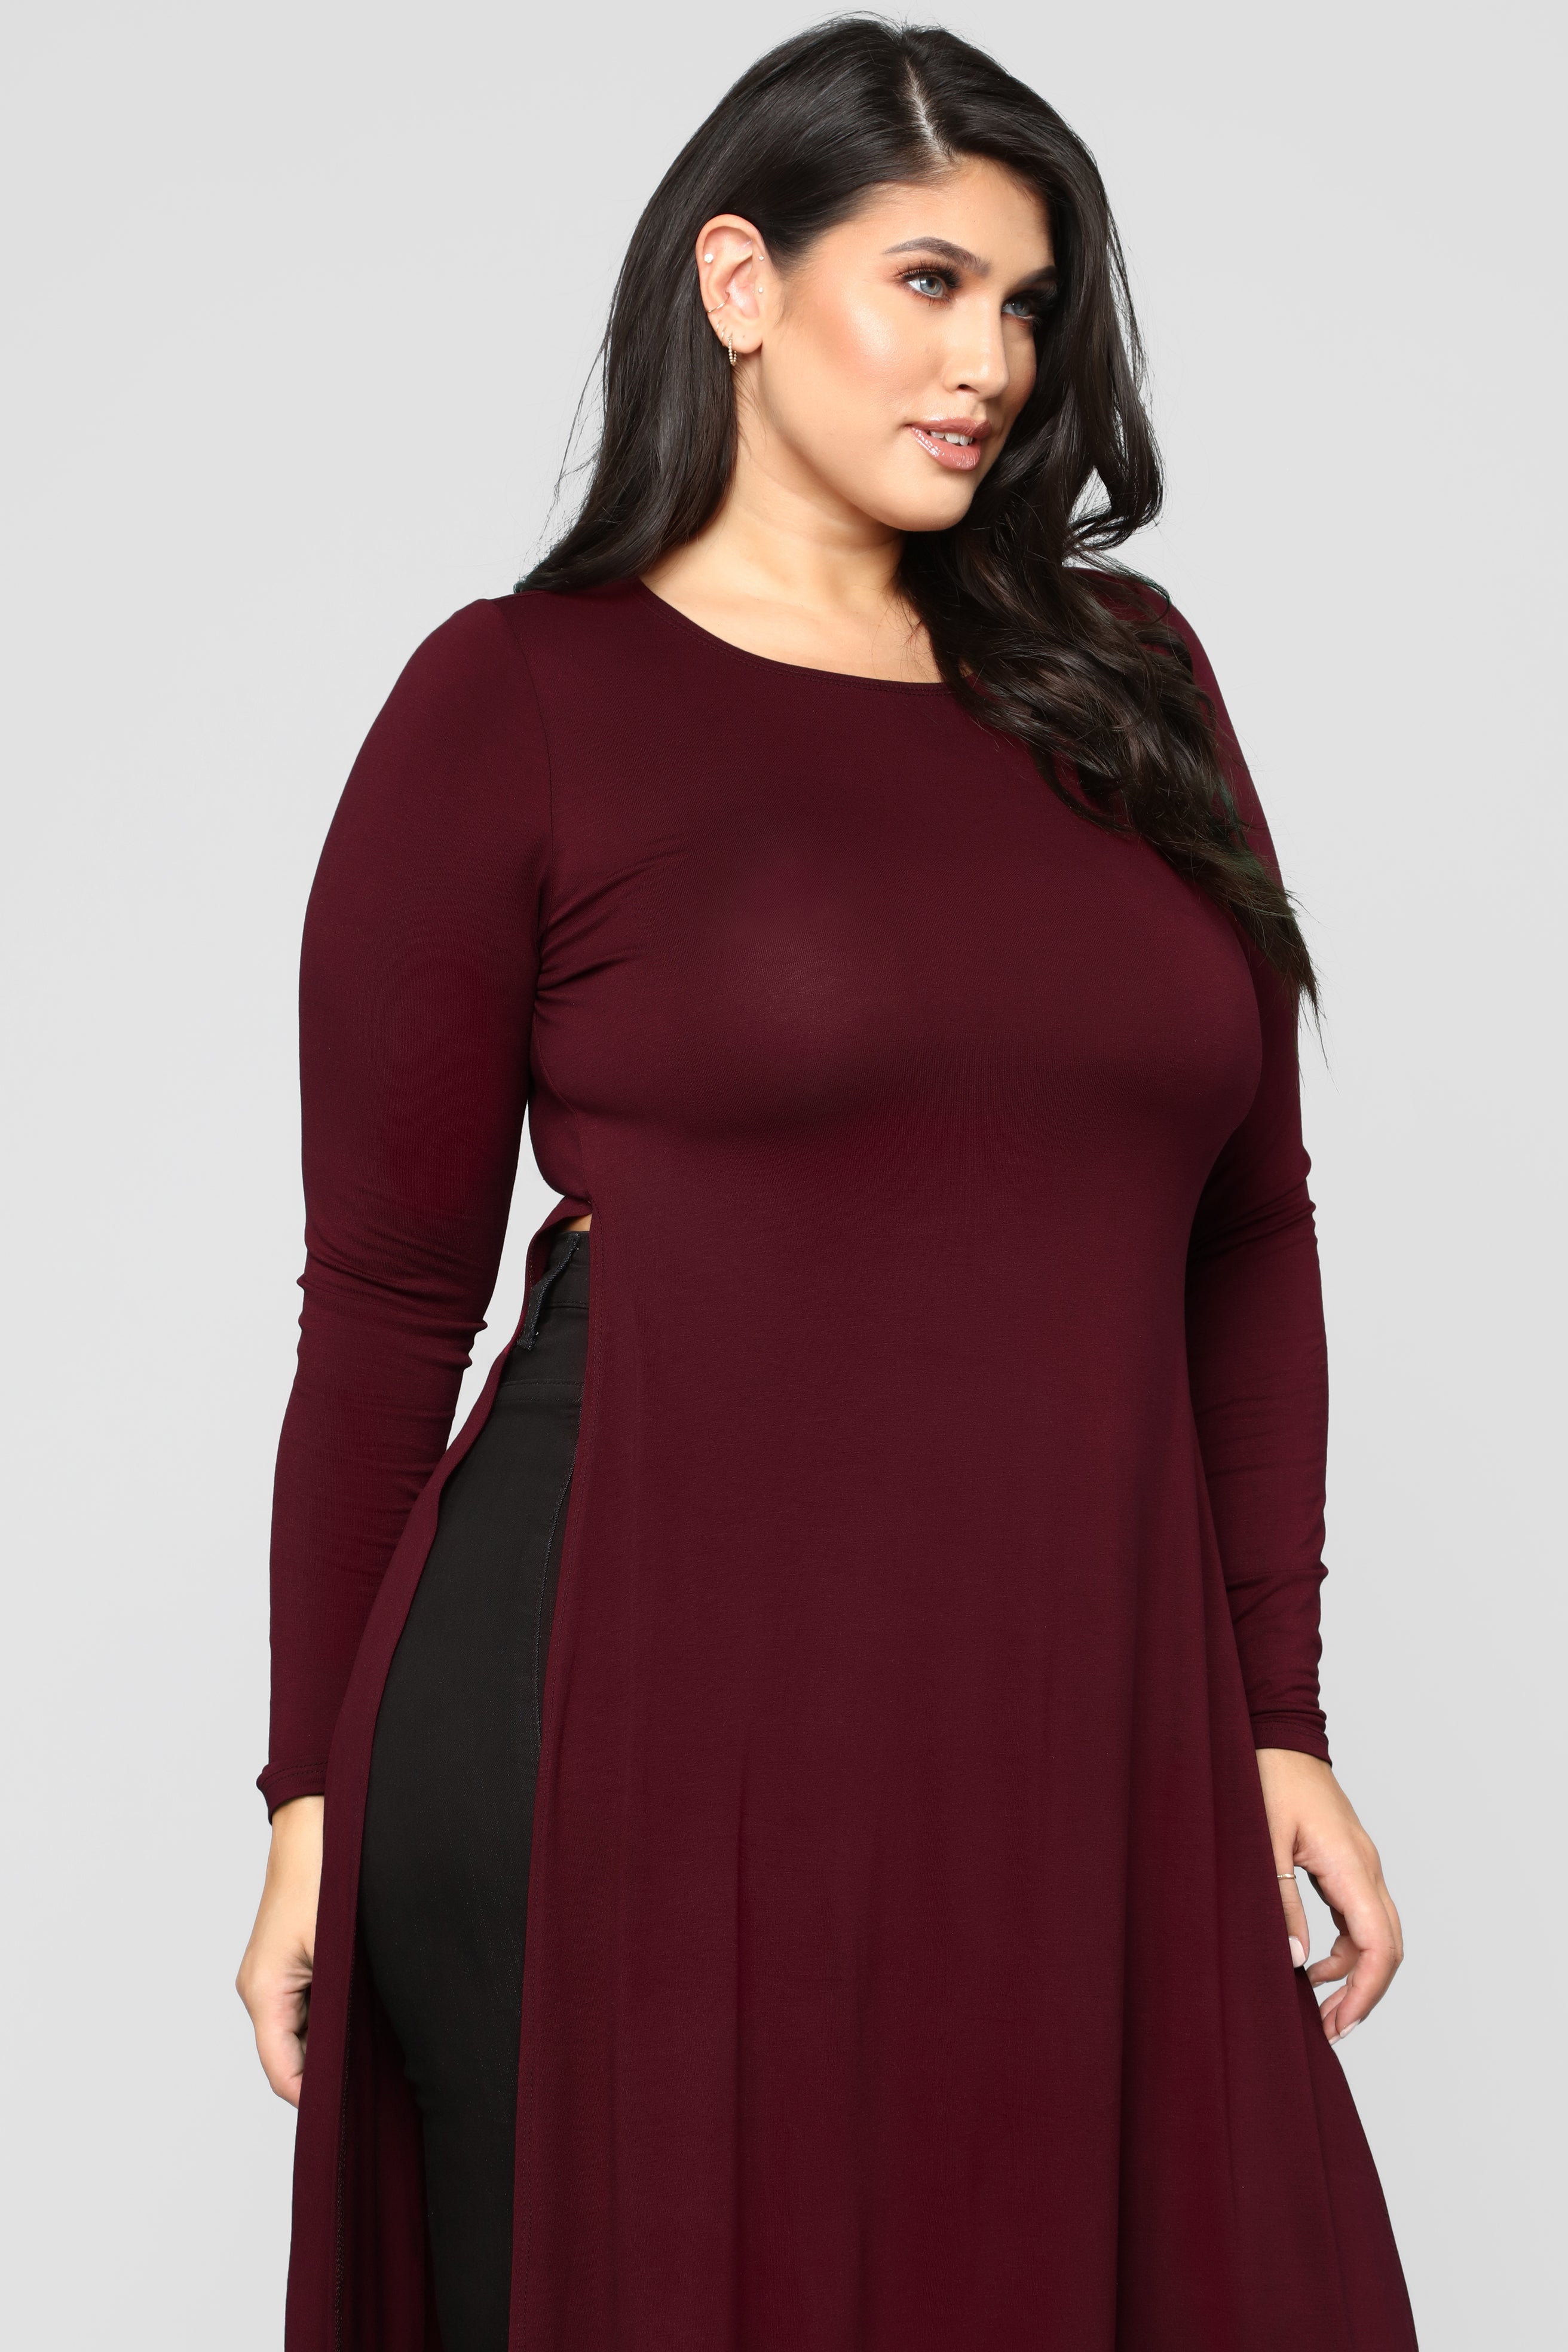 over exposed tunic - burgundy